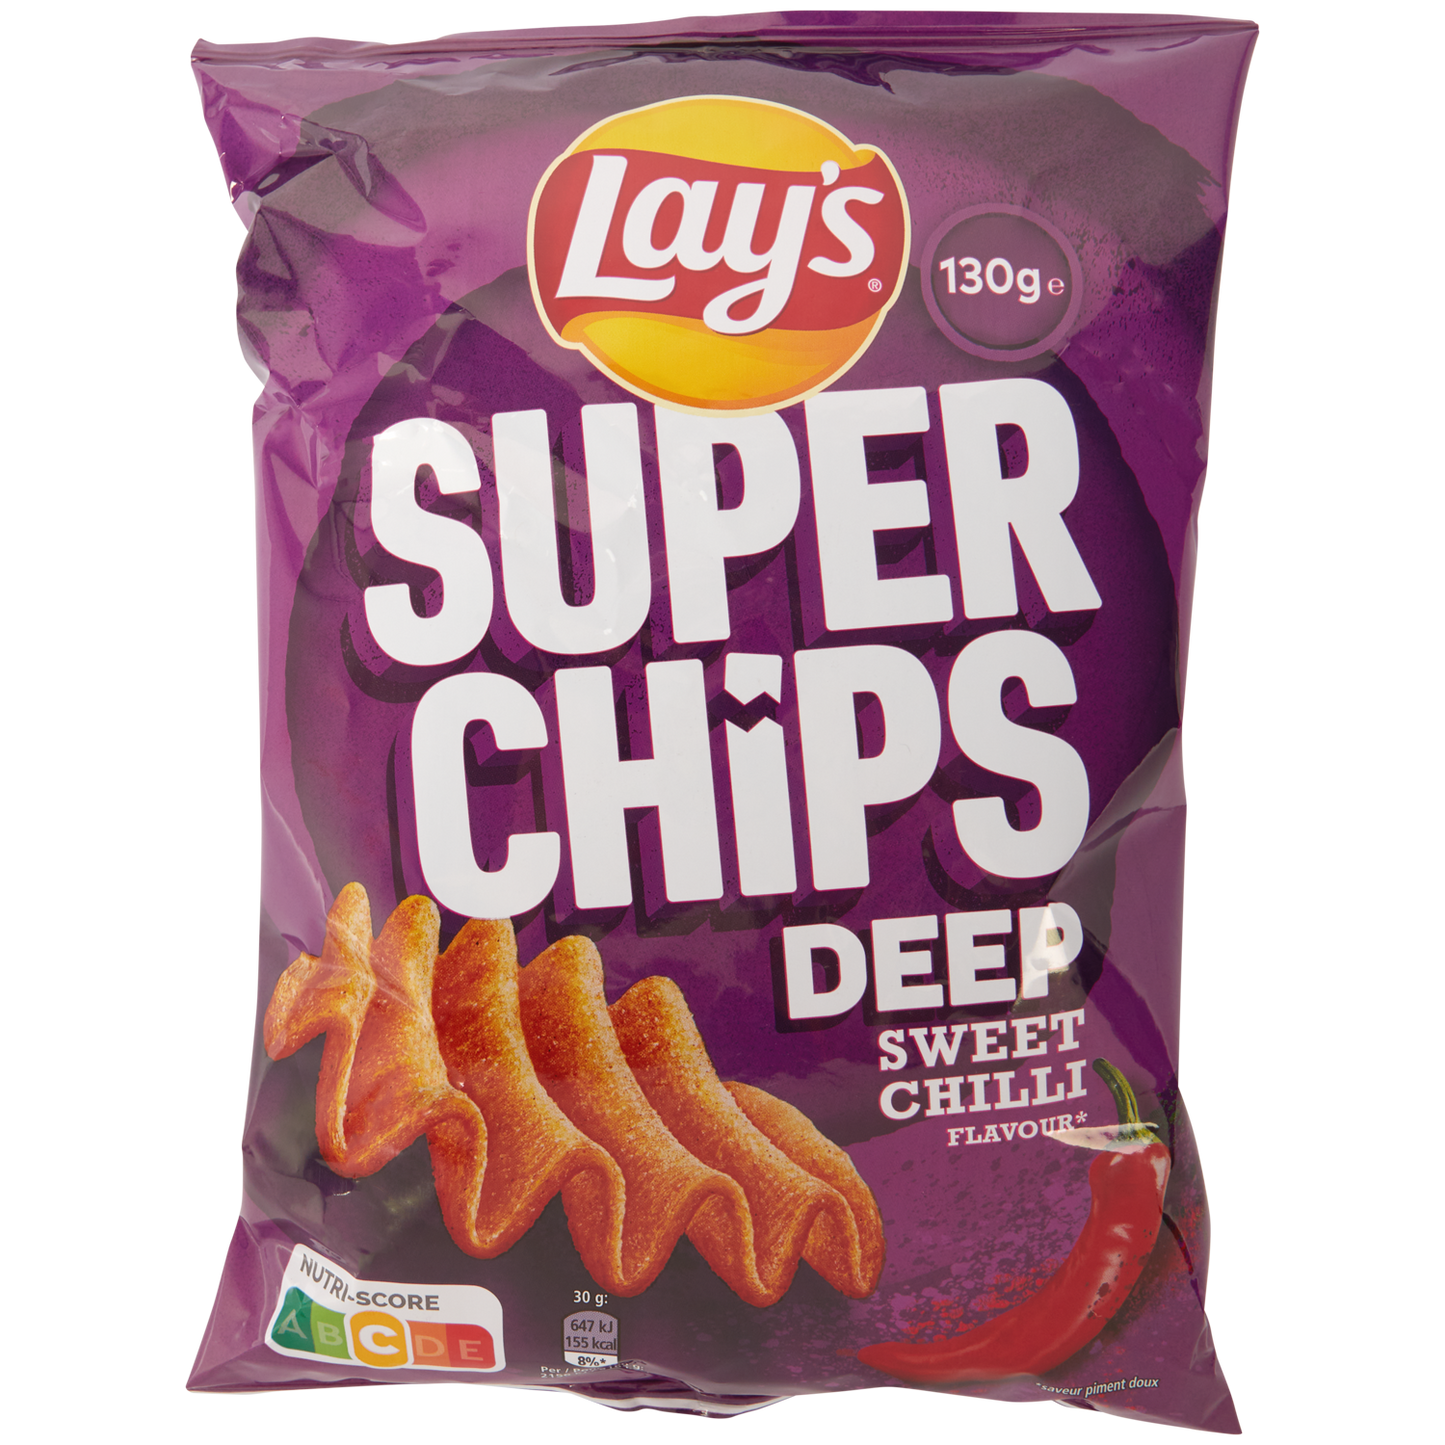 Super chips lay's deep sweet chili